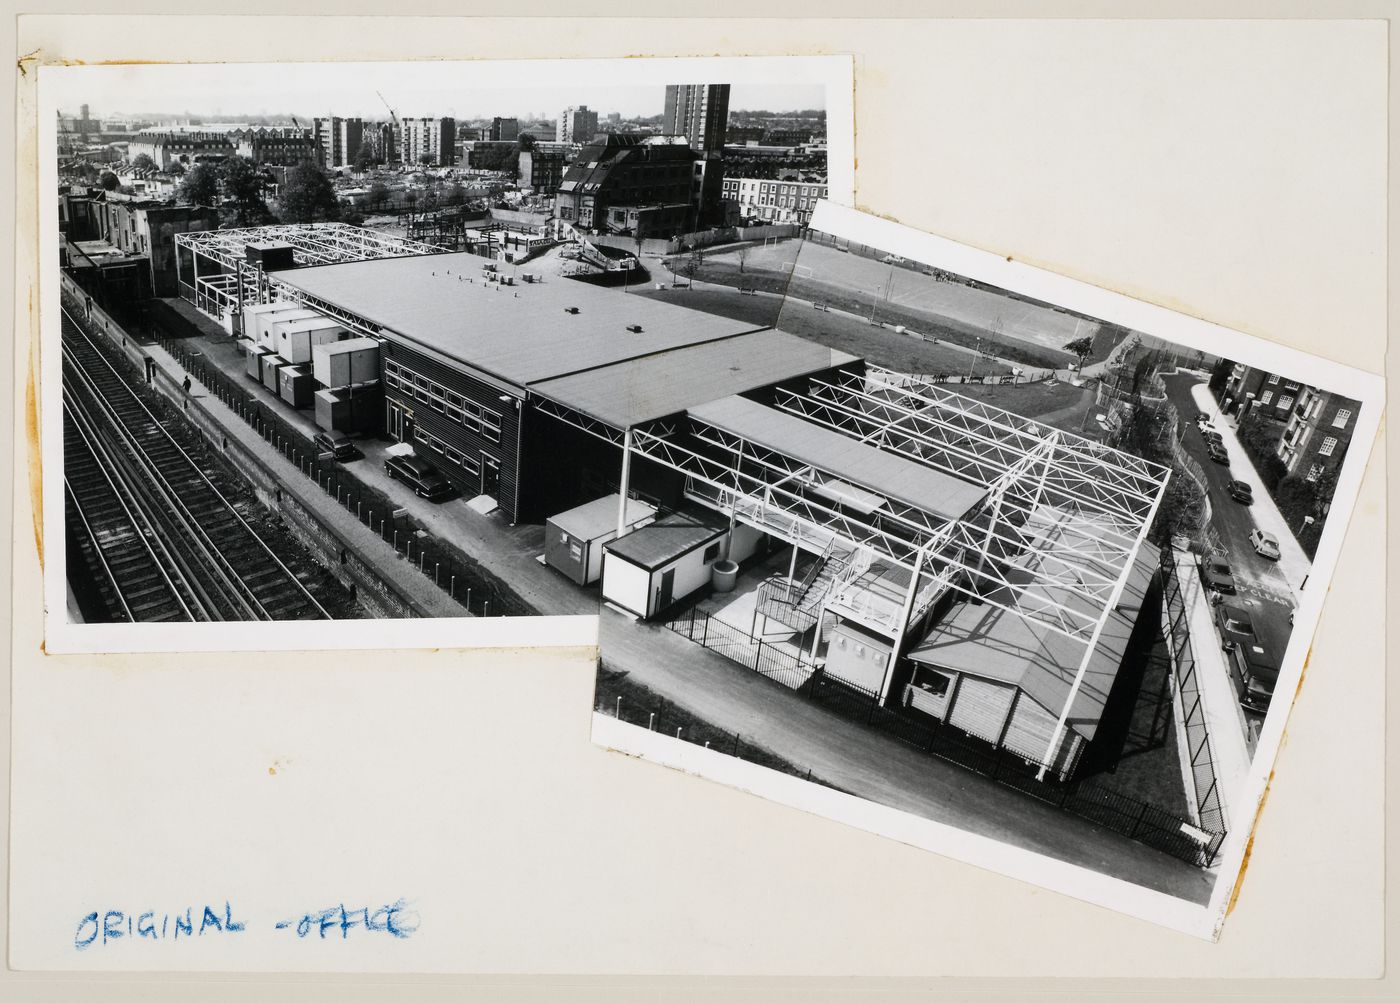 Aerial view of Inter-Action Centre, London, England